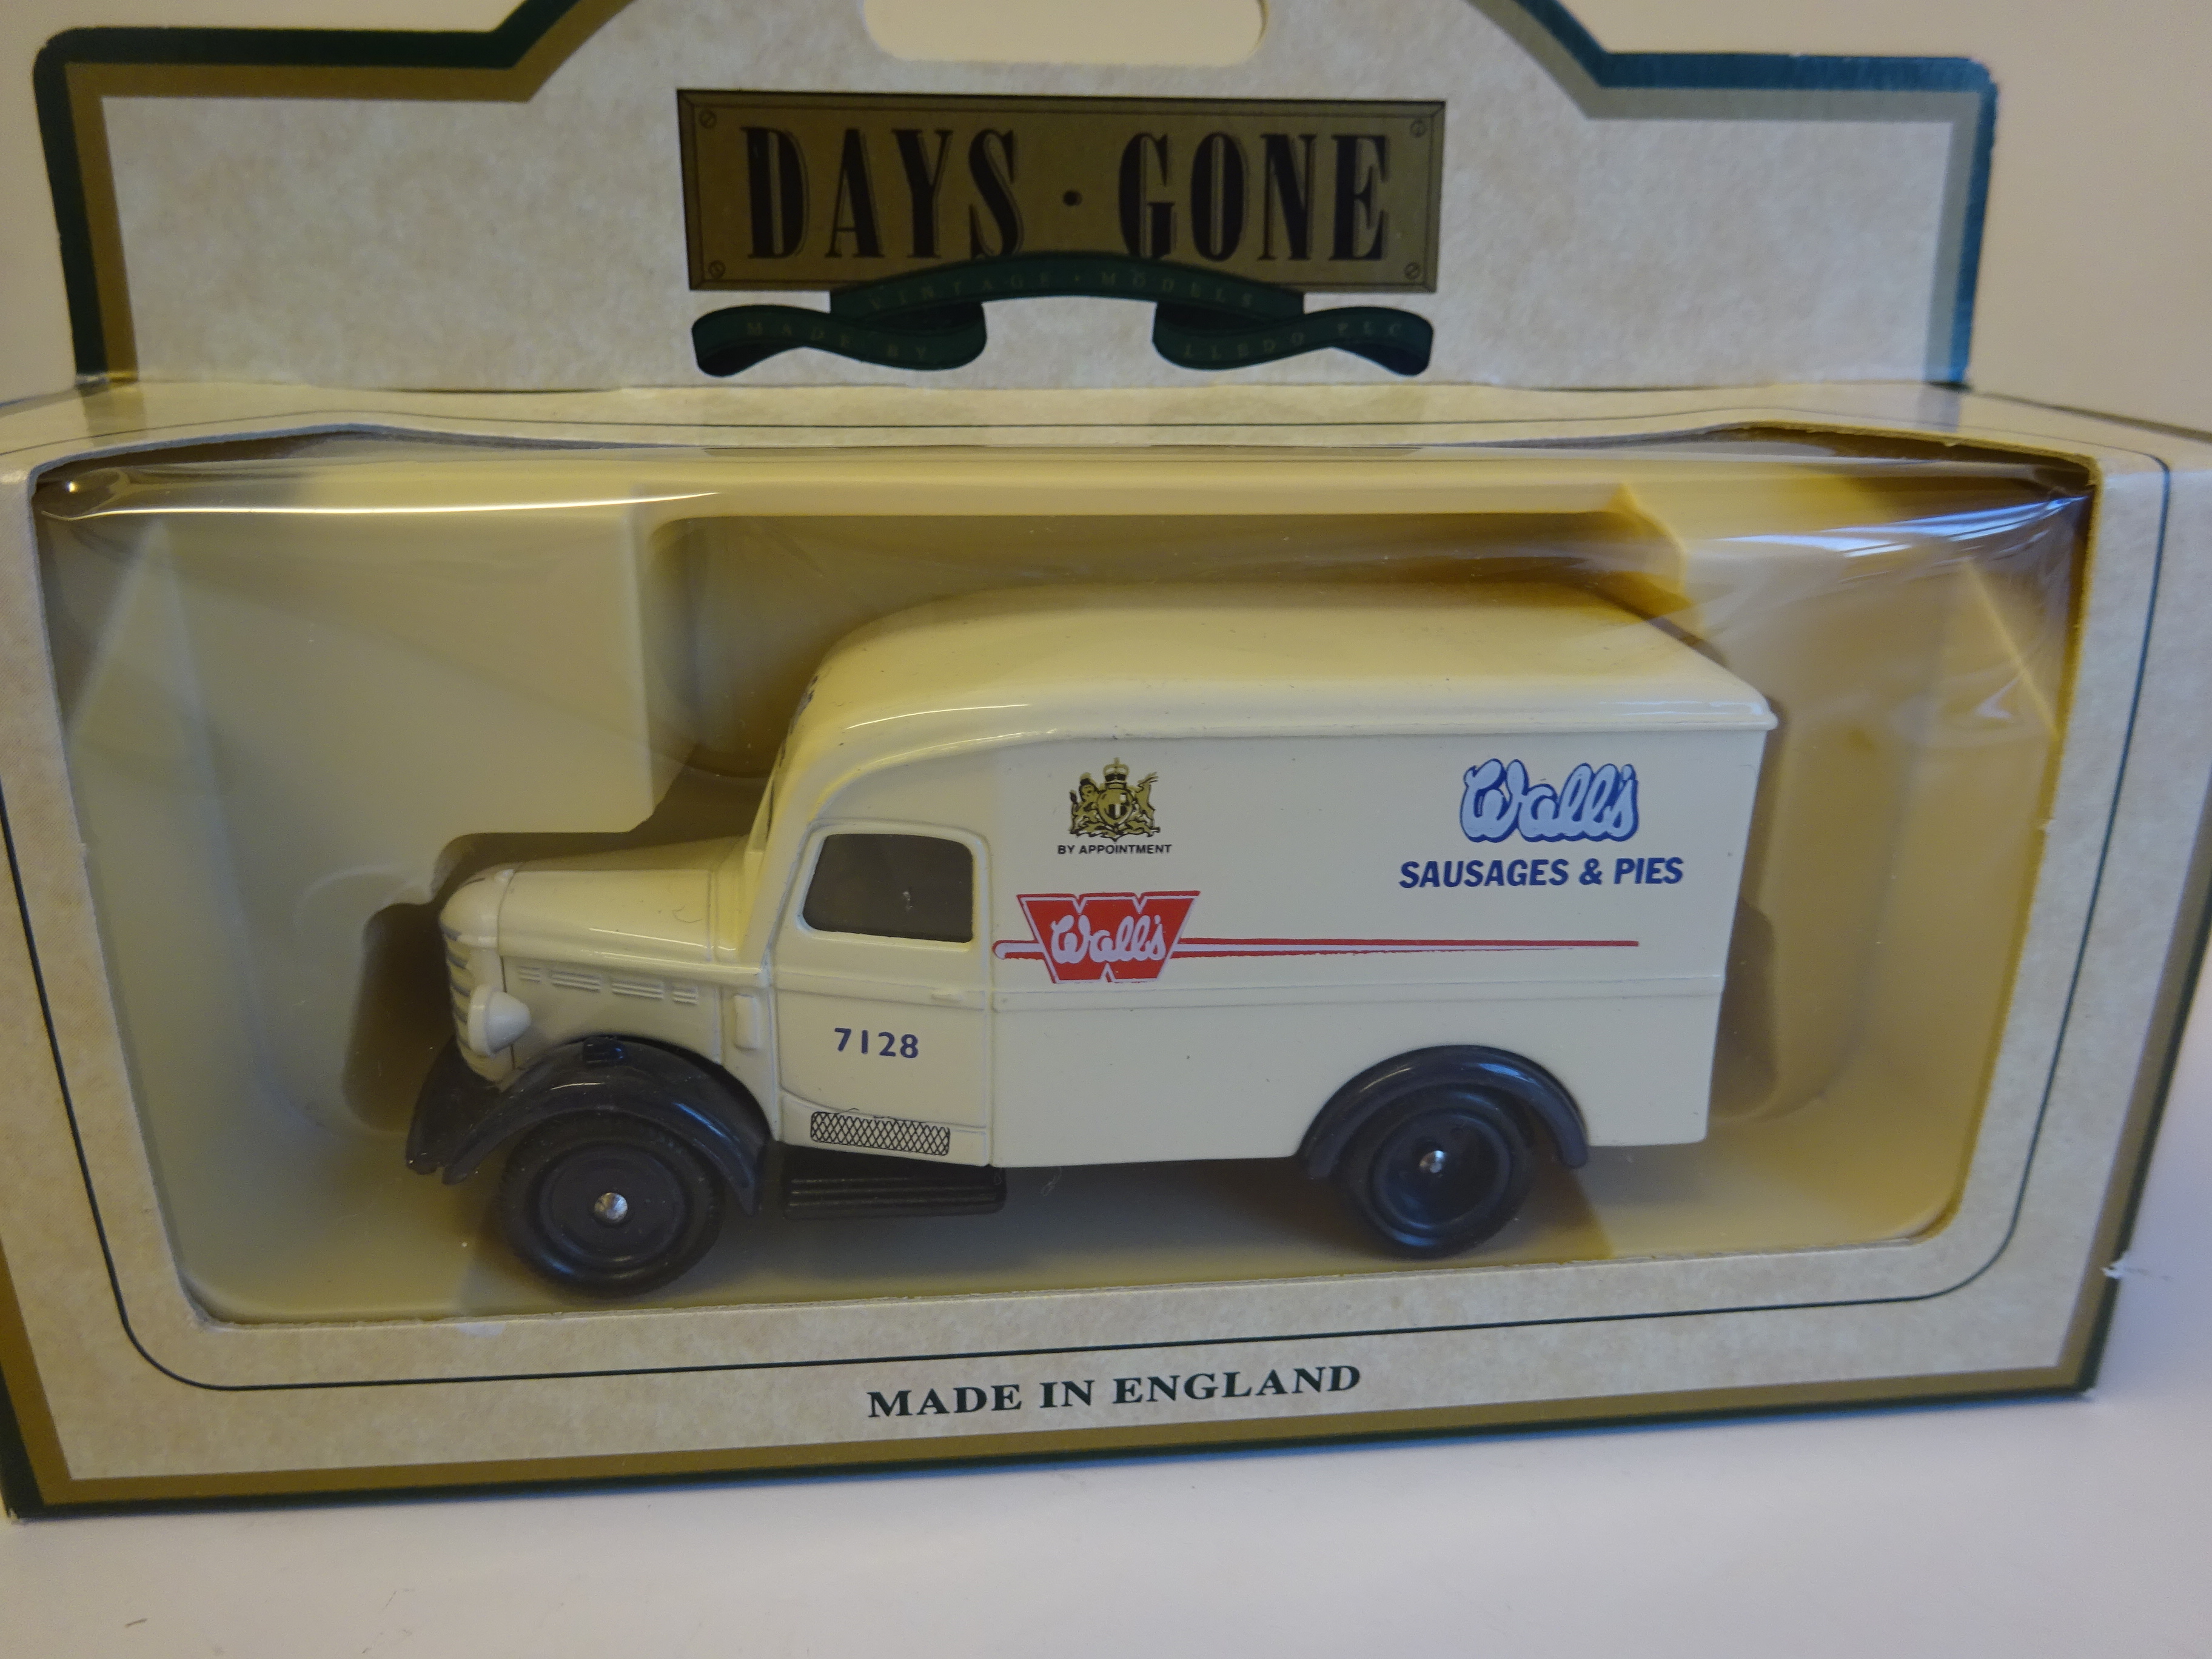 10 x Days Gone commercial vehicles - Image 7 of 10